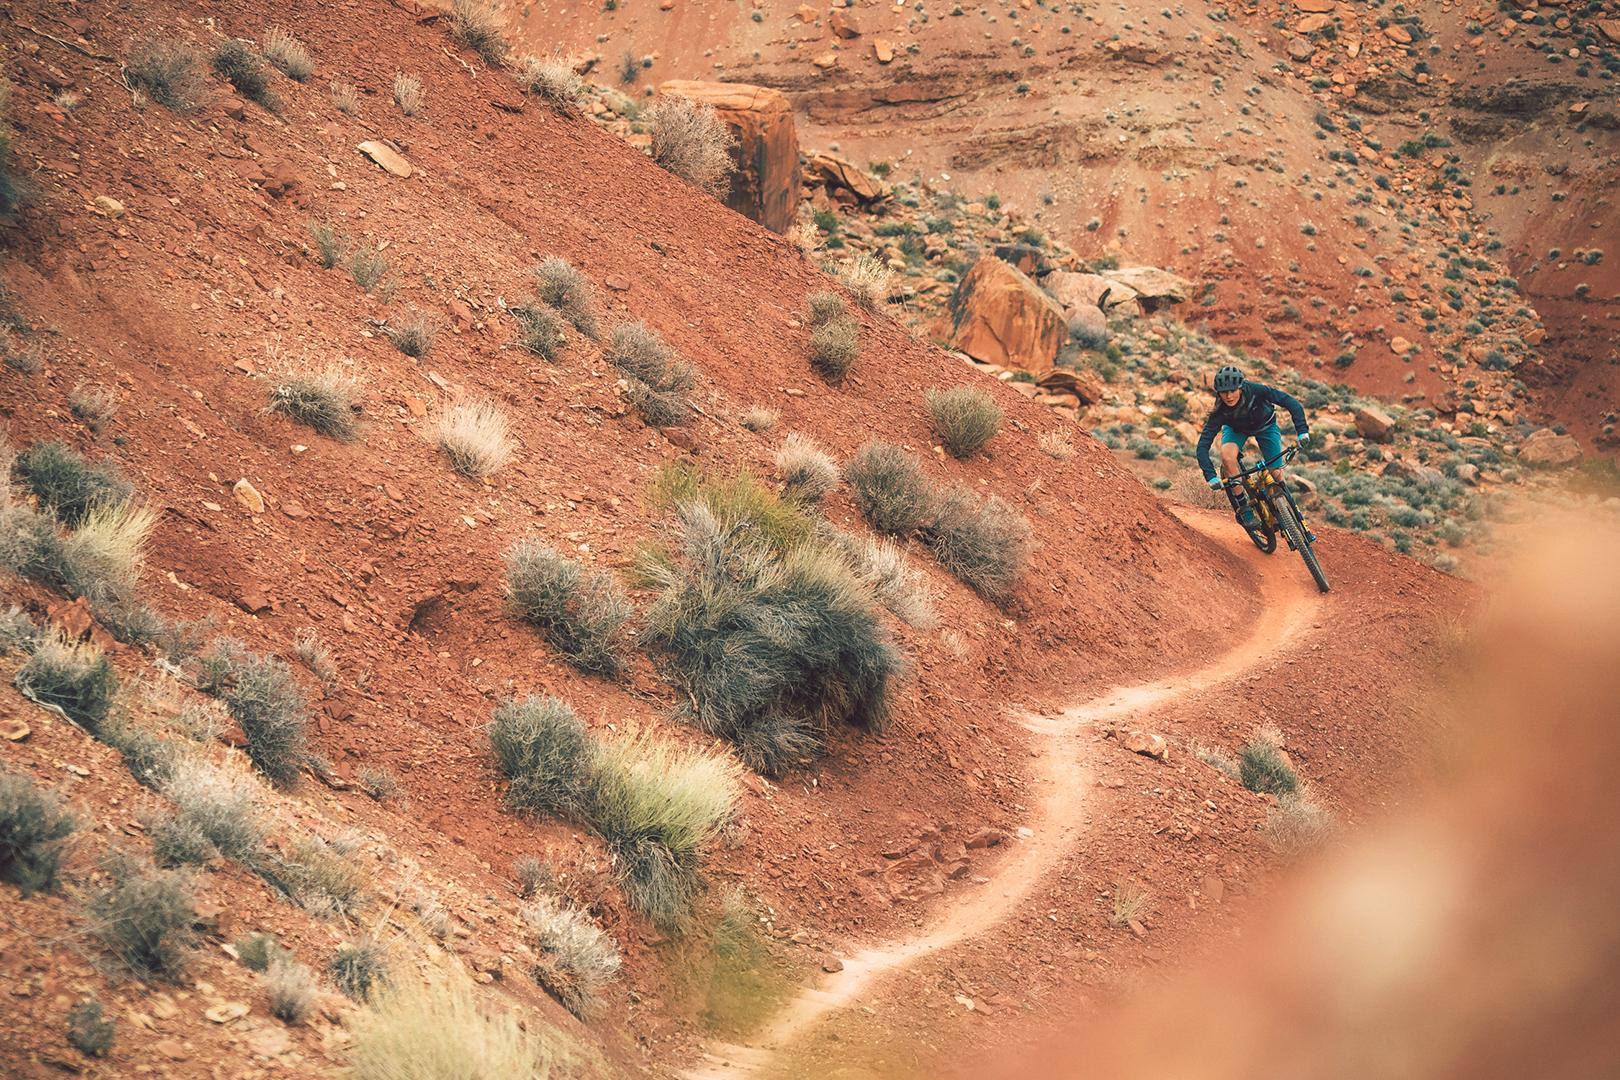 Surfing contour lines on Pipe Dream Trail, Moab, Utah